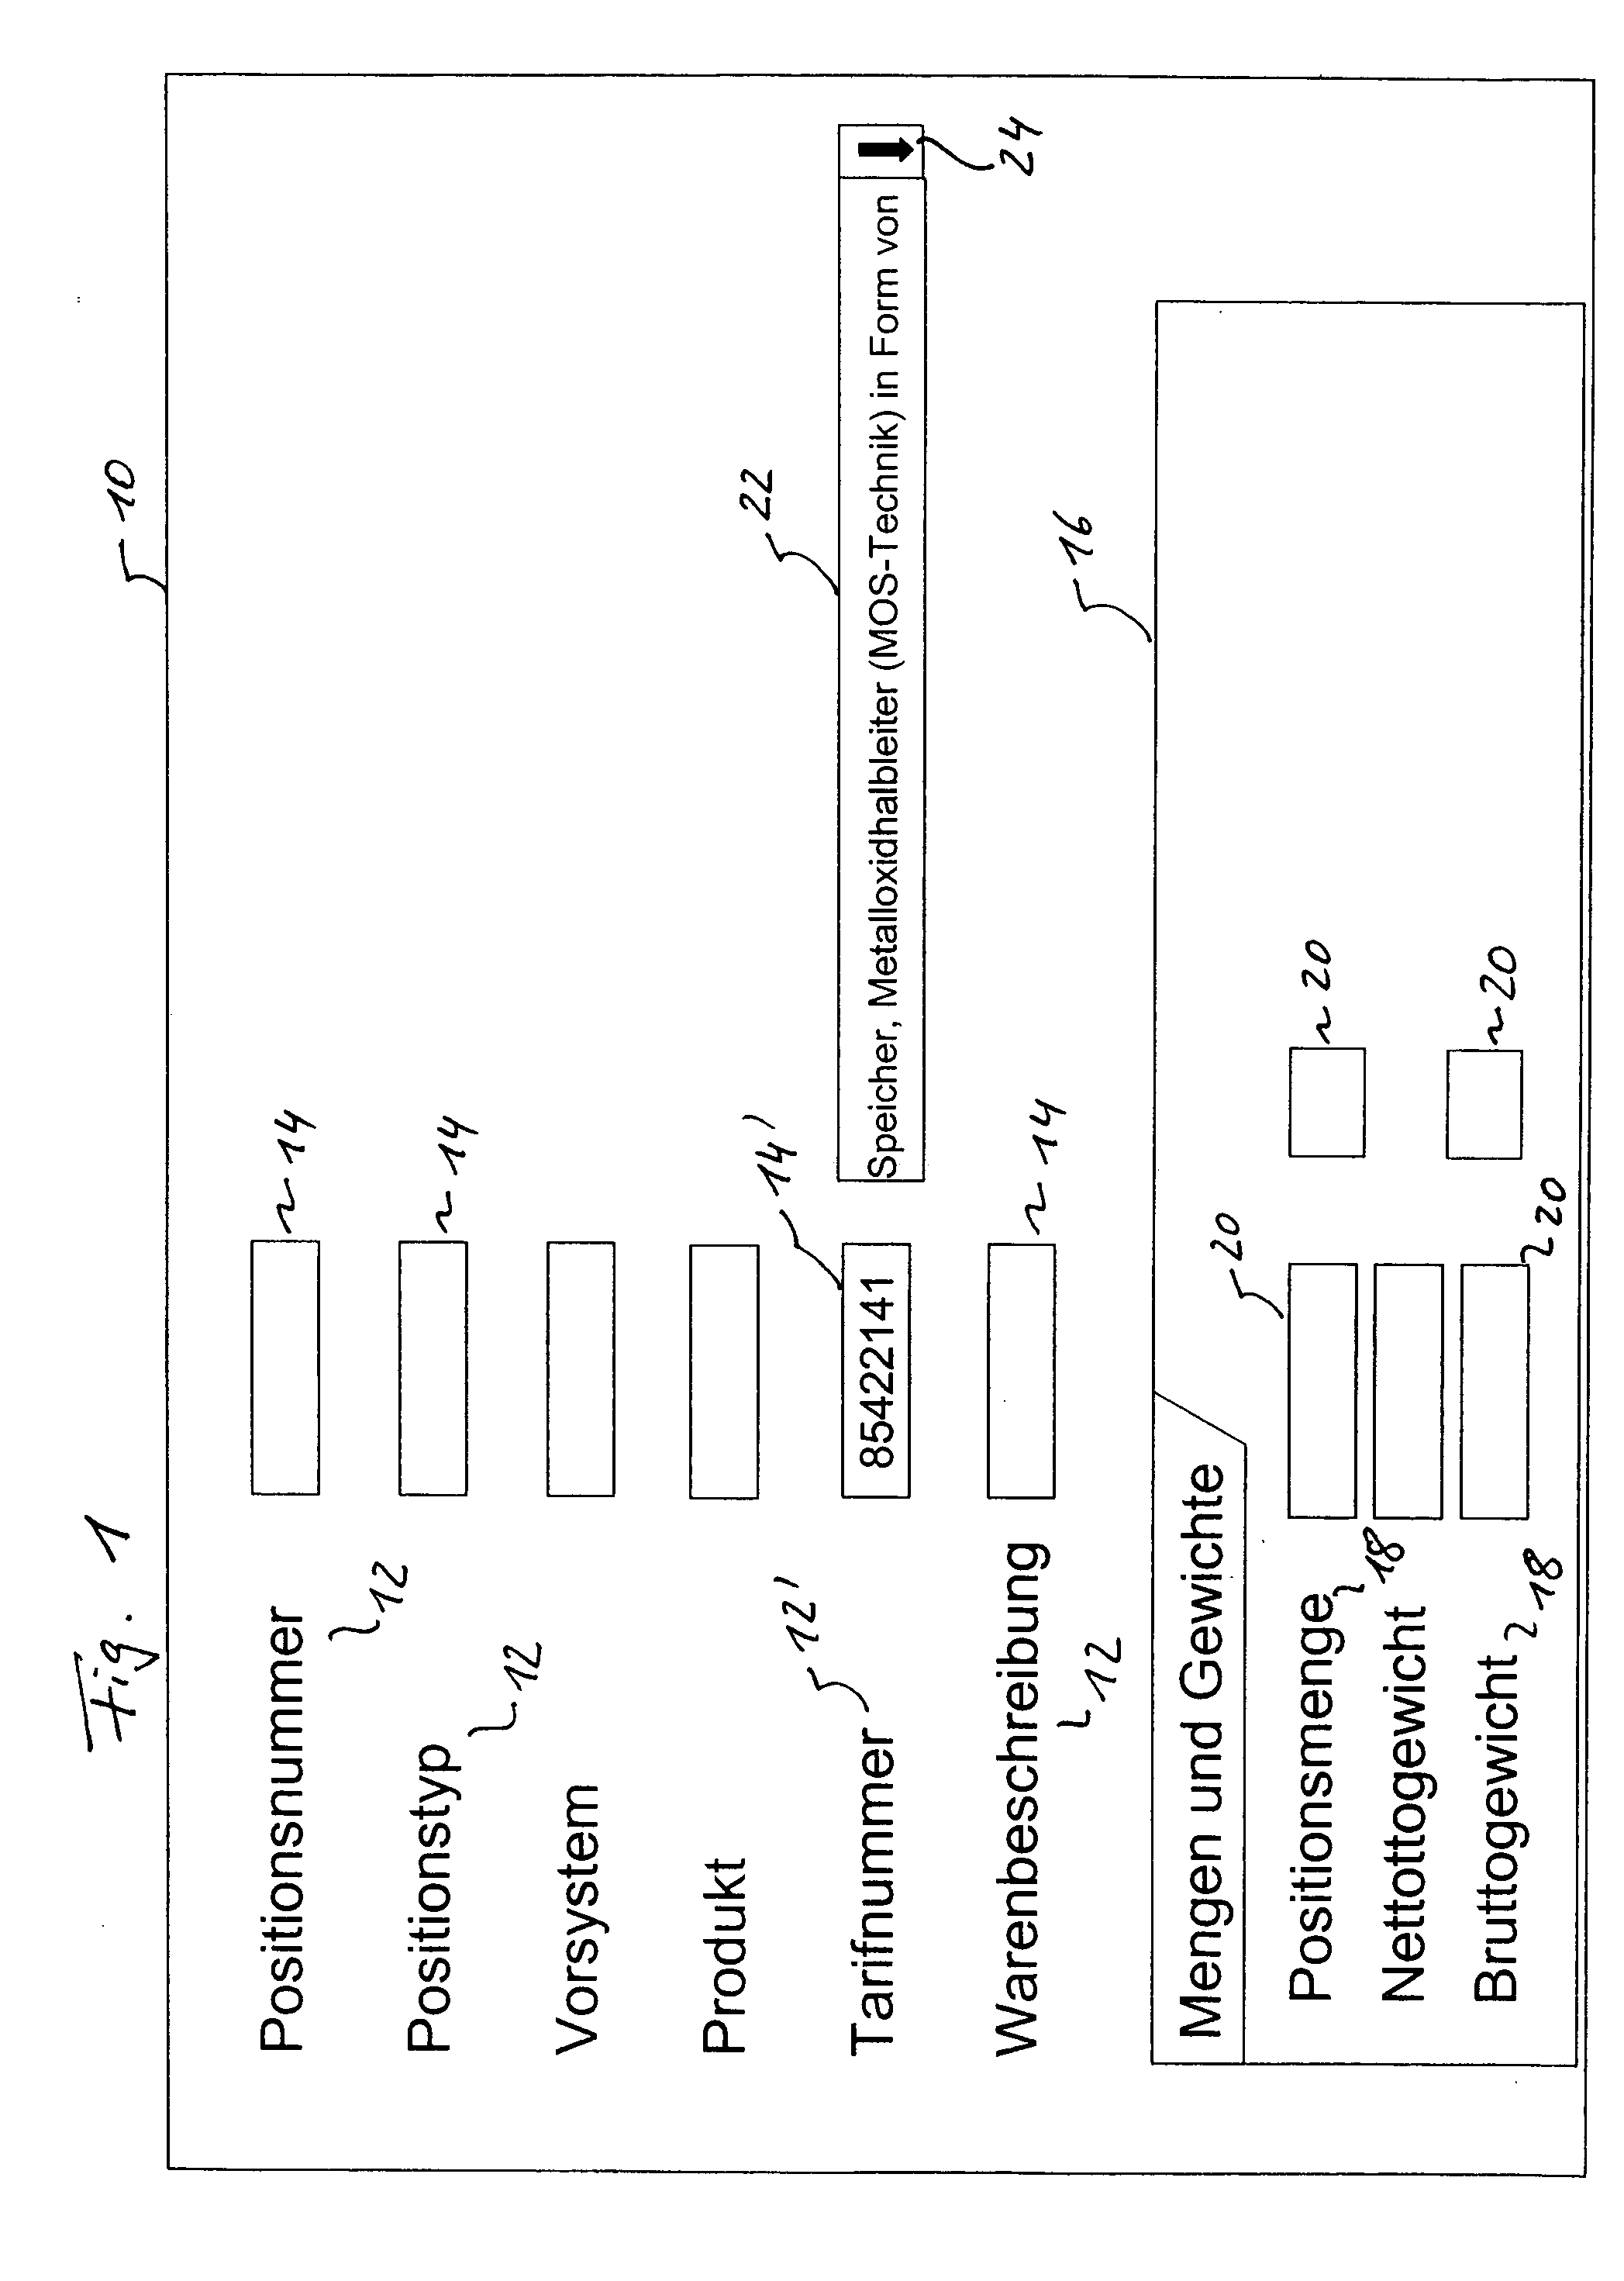 Methods and systems for outputting data on a graphical user interface of a computer system